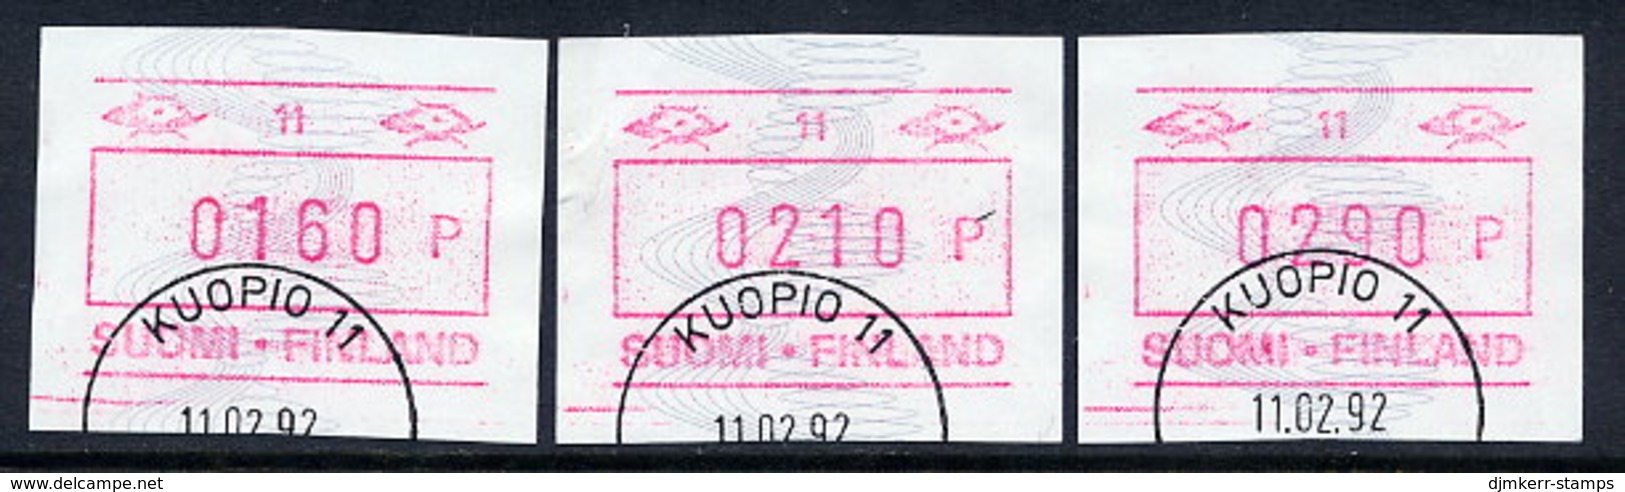 FINLAND 1990 Definitive With ATM Number , 3 Different Values Used .Michel 8 - Automaatzegels [ATM]